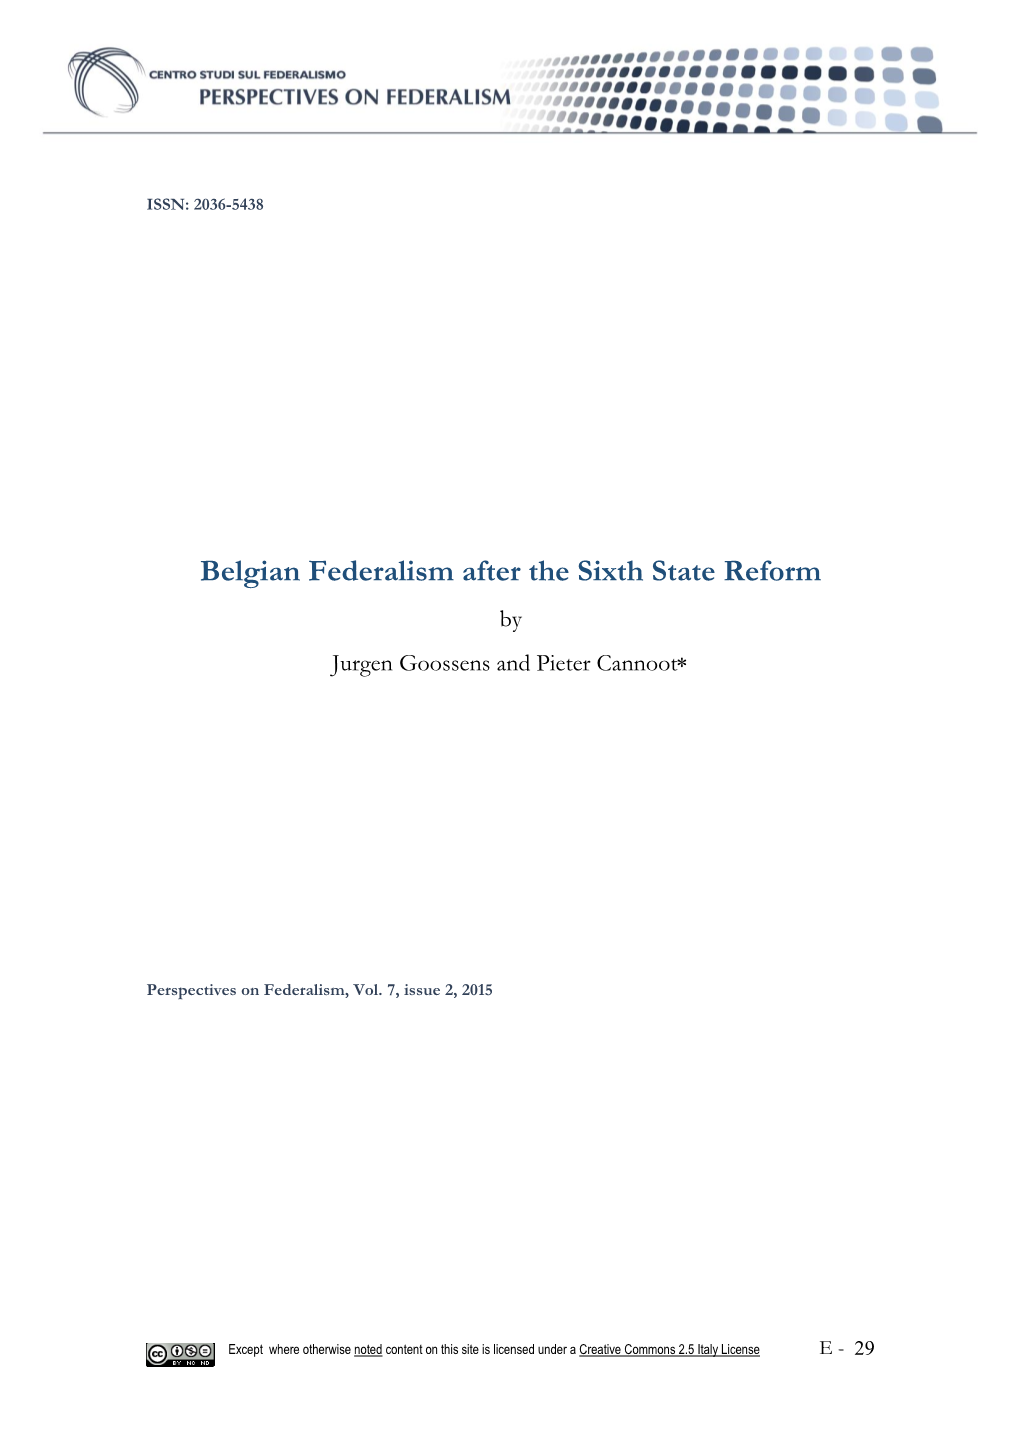 Belgian Federalism After the Sixth State Reform by Jurgen Goossens and Pieter Cannoot